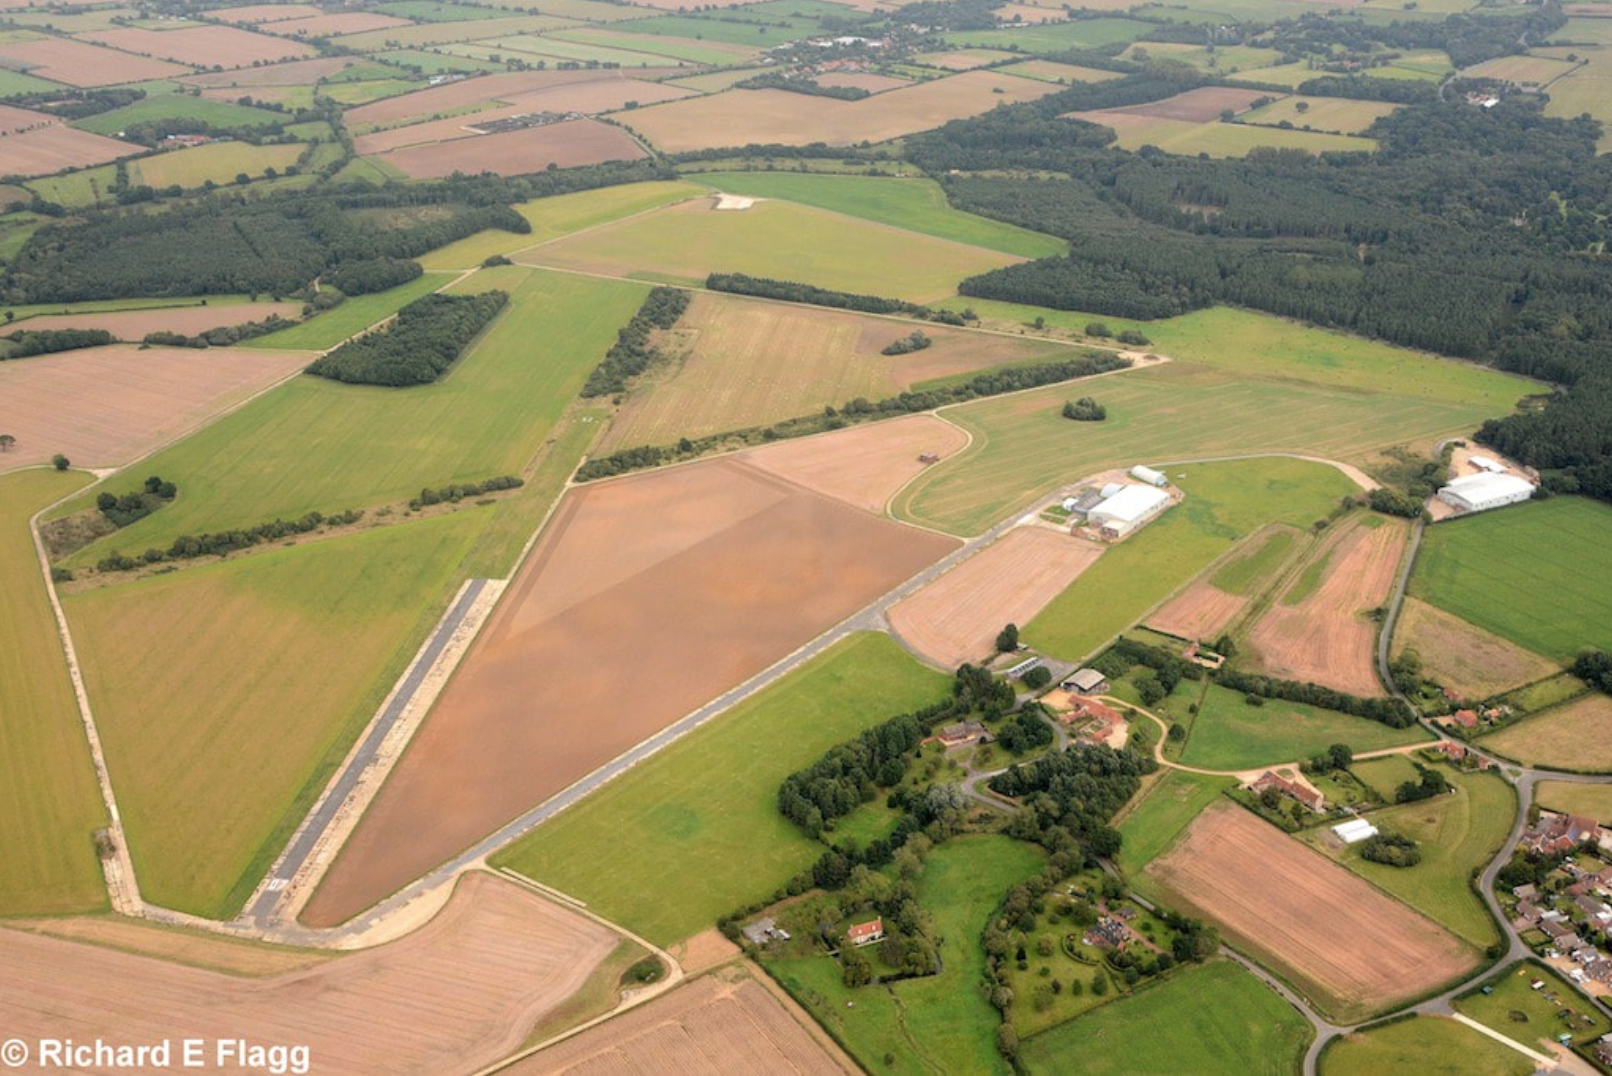 020Aerial View of RAF Little Snoring Airfield - 25 September 2016.png